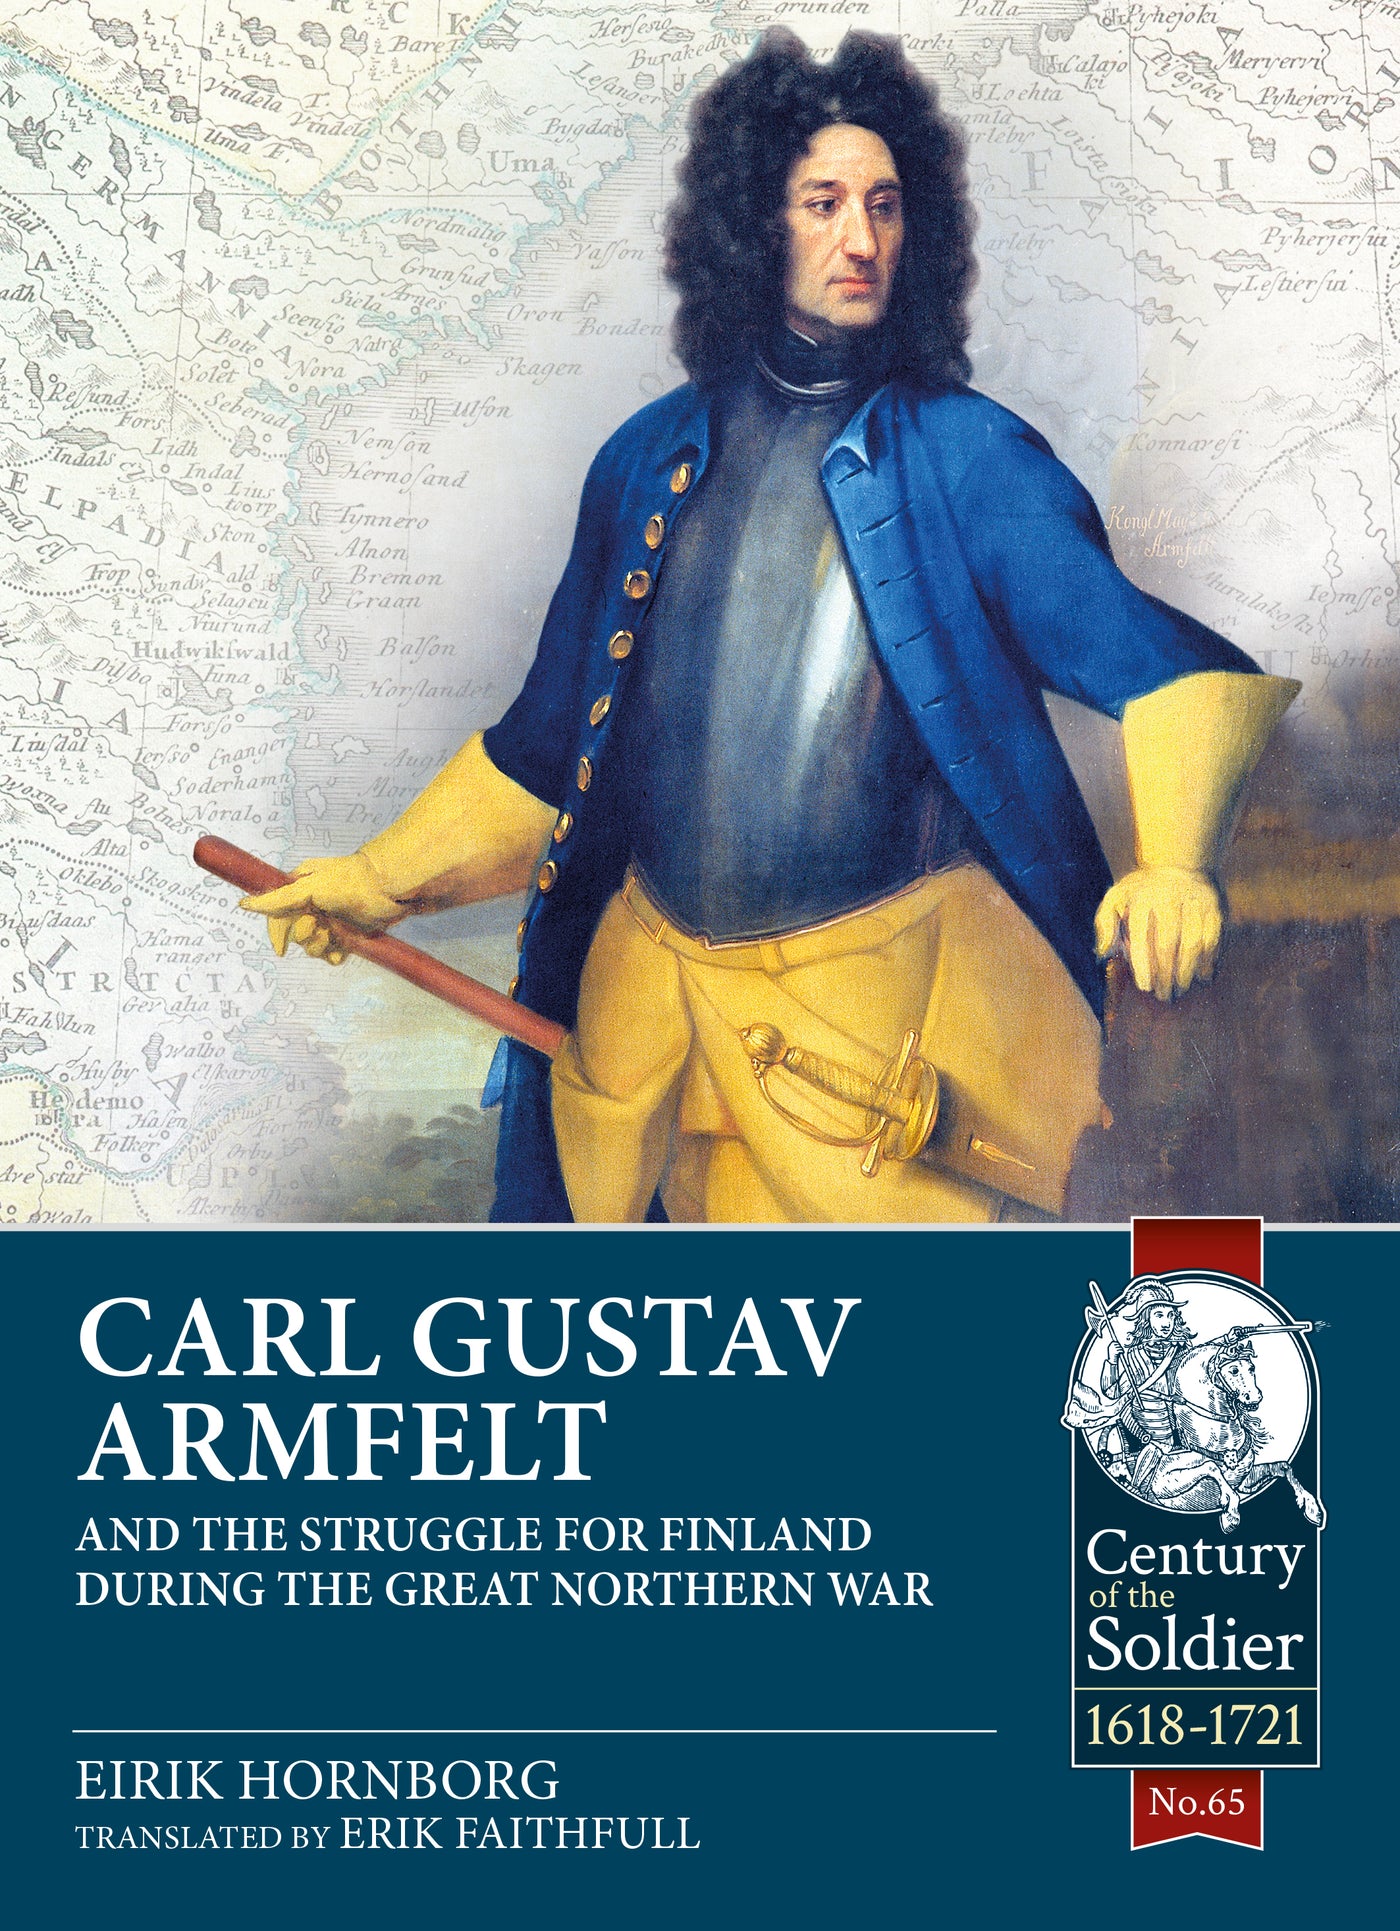 Carl Gustav Armfelt and the Struggle for Finland during the Great Northern War